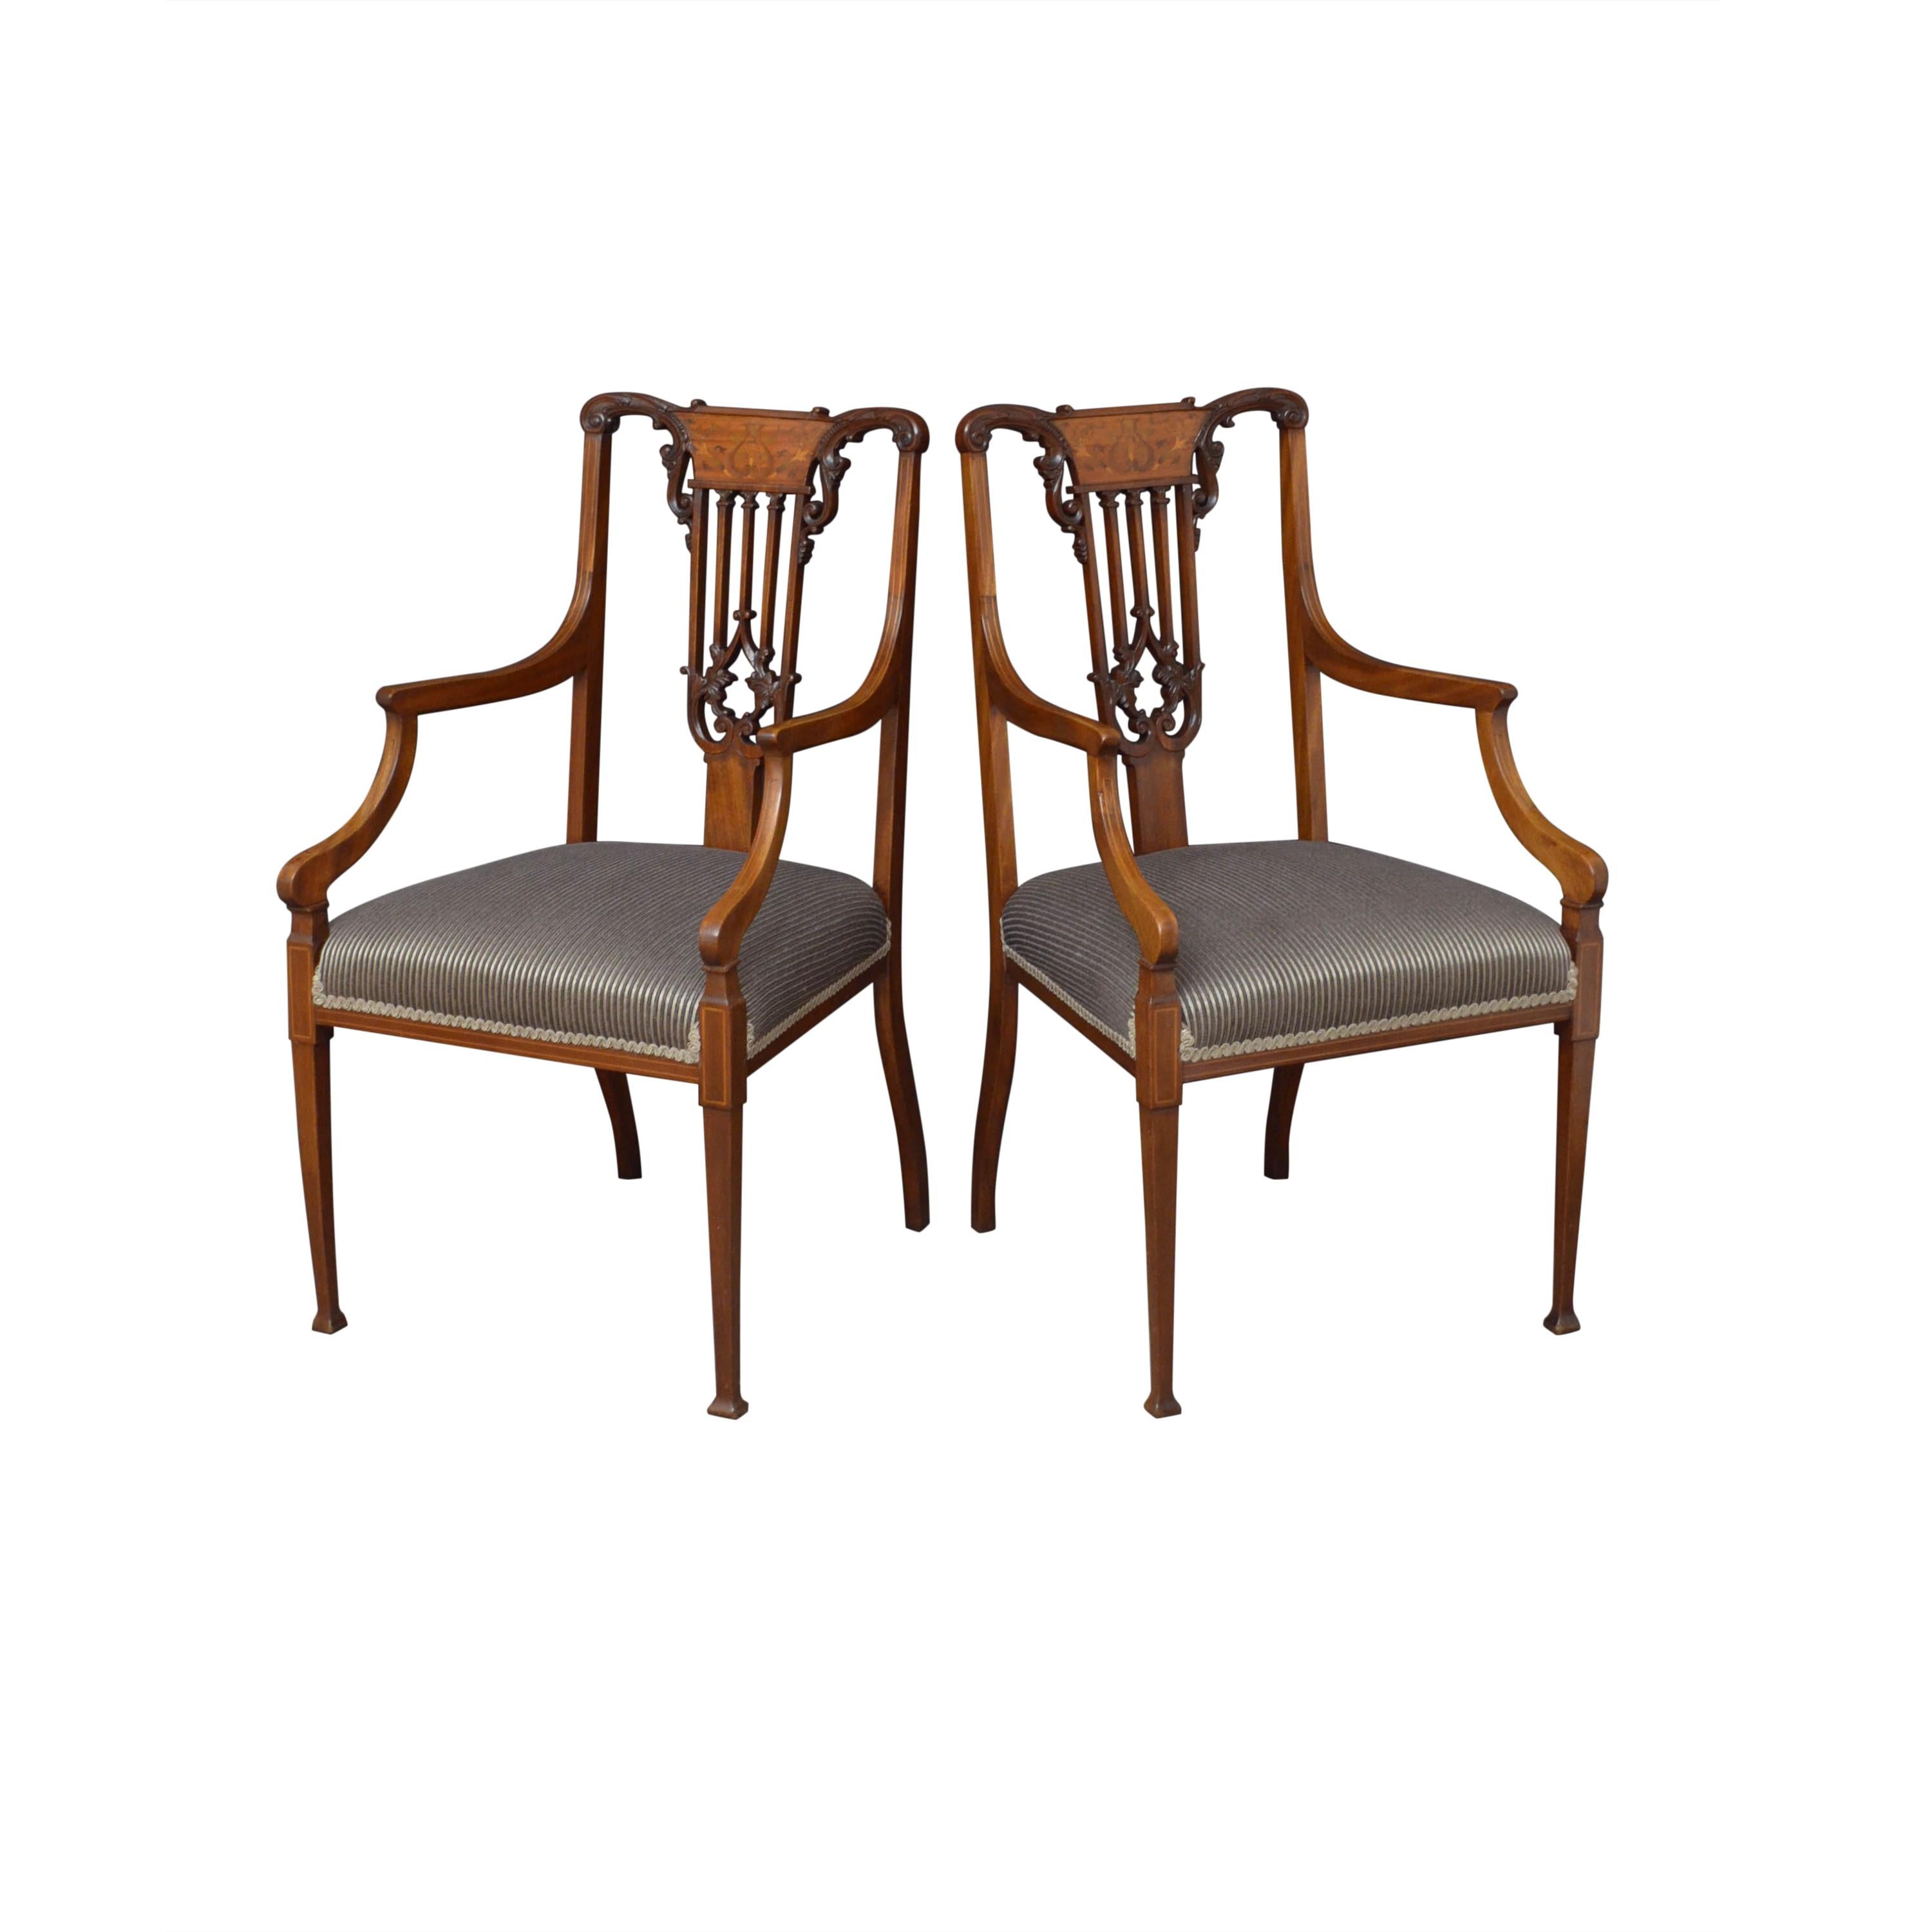 Pair of Late Victorian Carver Chairs in Mahogany